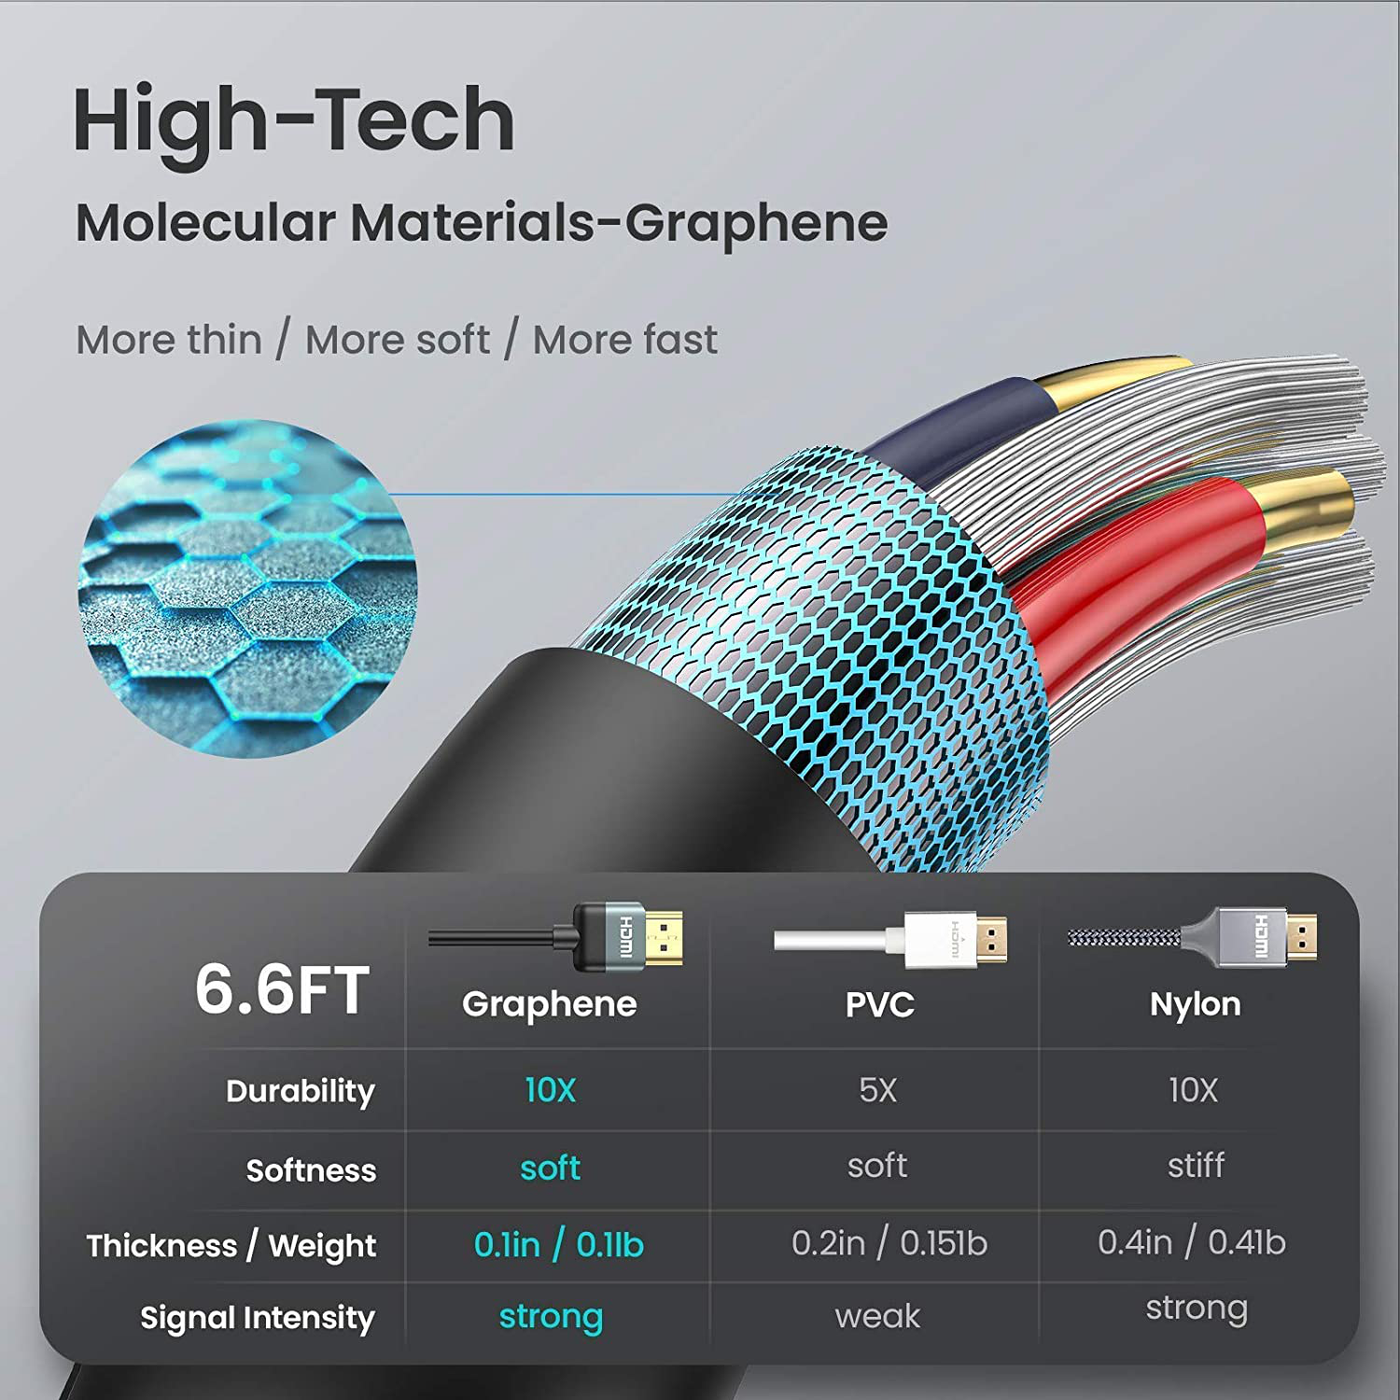 [High-Tech] 4K HDMI Cable 6.6FT, AINOPE Ultra Flexible Graphene HDMI Cable High Speed HDMI 2.0 Cable, 4K 60Hz HDR,2160P,1080P,3D,Ethernet,ARC,30AWG Compatible with UHD TV,PS4,PS5,Blu-ray,PC,Projector